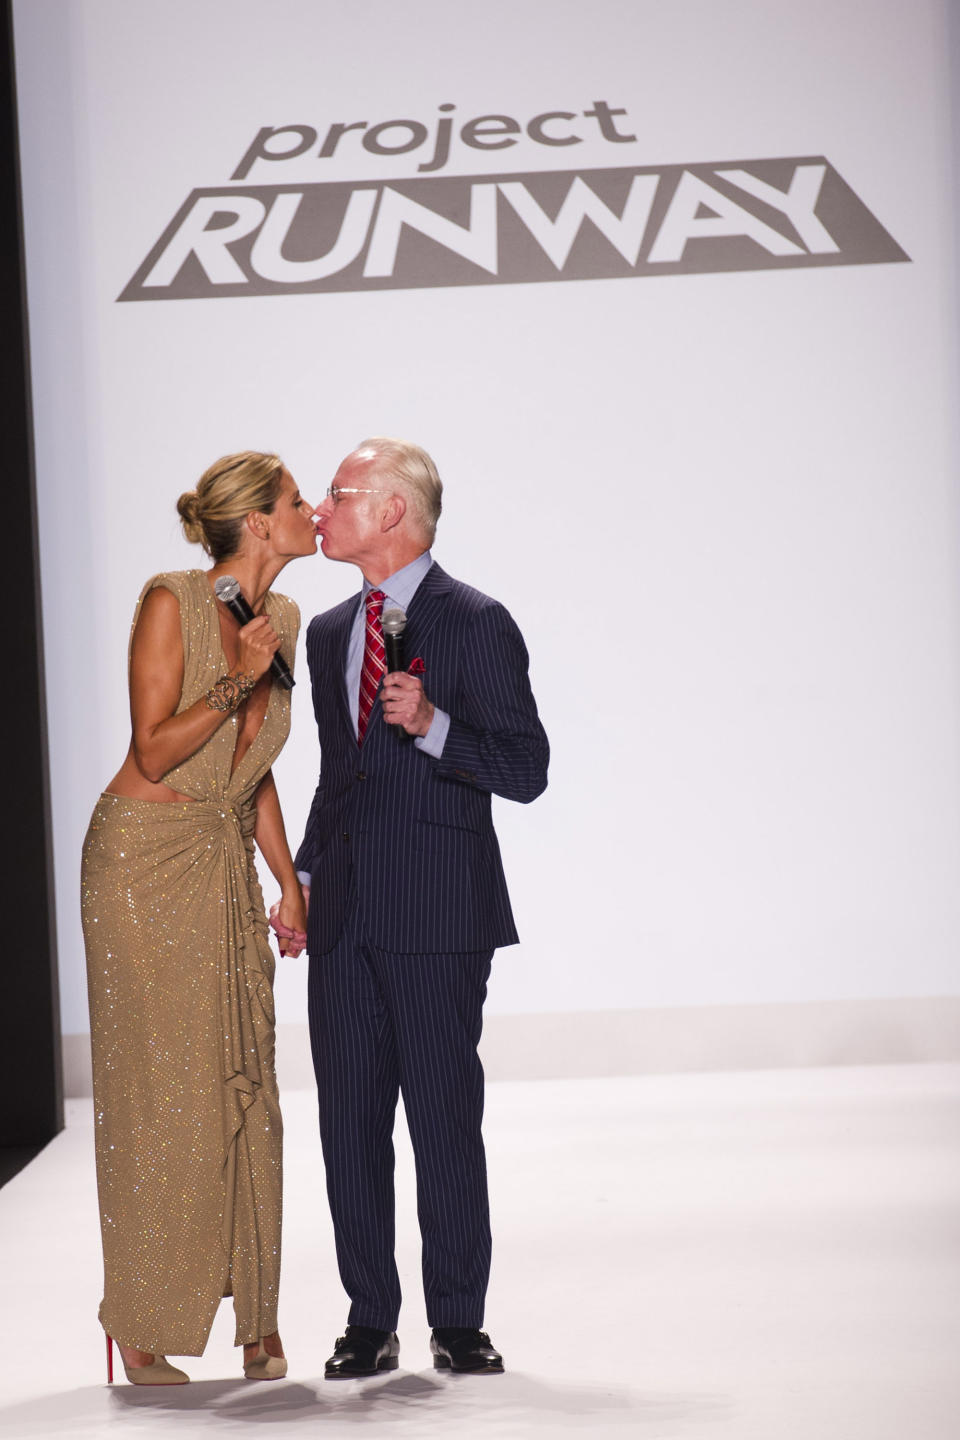 Heidi Klum, left, and Tim Gunn walk the runway at the Project Runway finale fashion show during Fashion Week on Friday, Sept. 7, 2012 in New York. (Photo by Charles Sykes/Invision/AP Images)